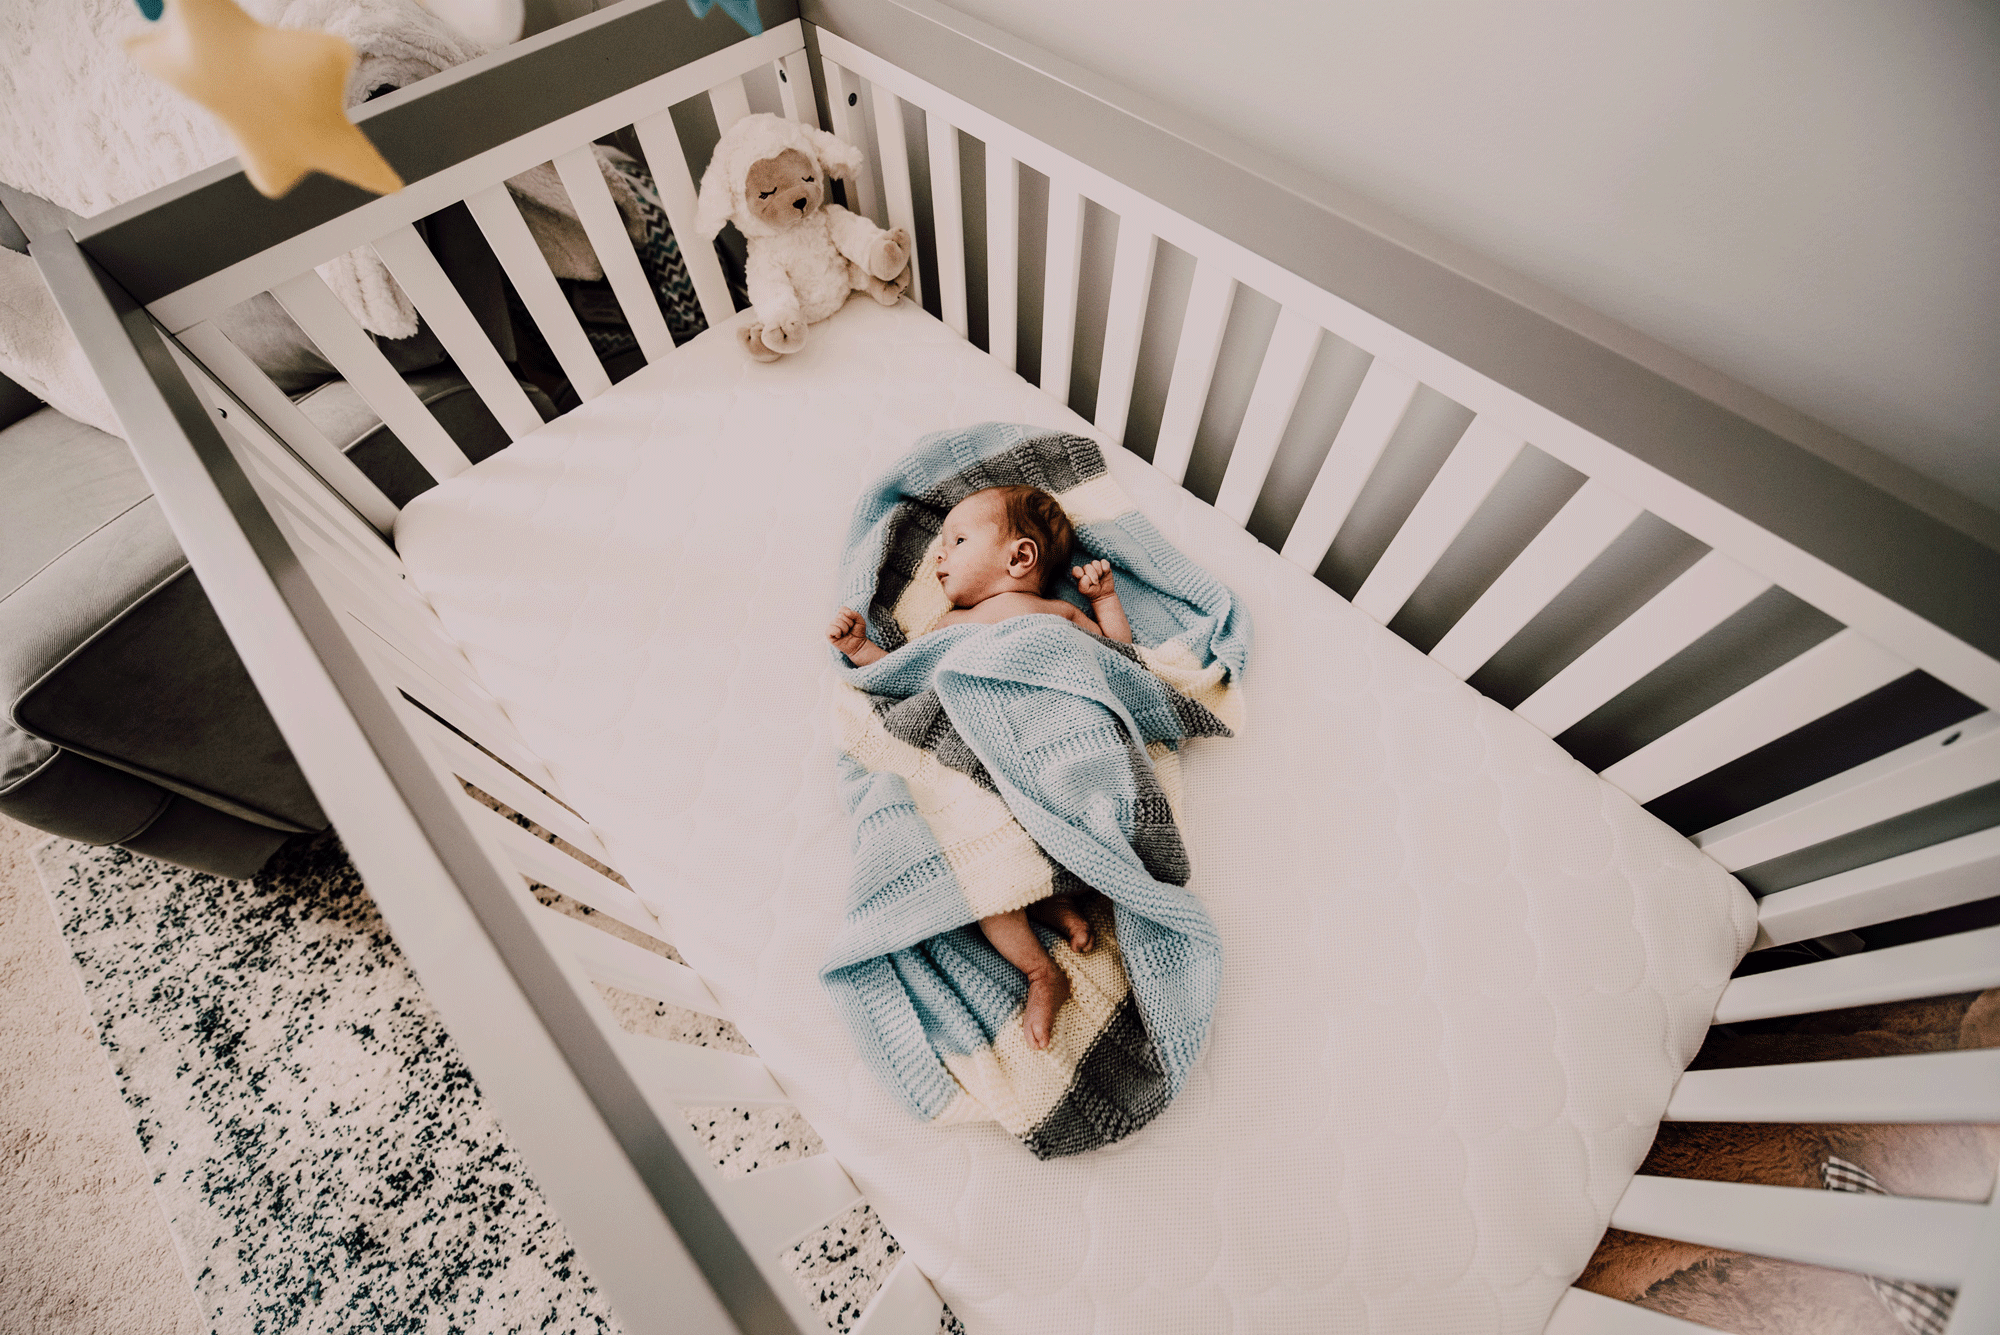 Does A Baby Have to Sleep in A Crib?